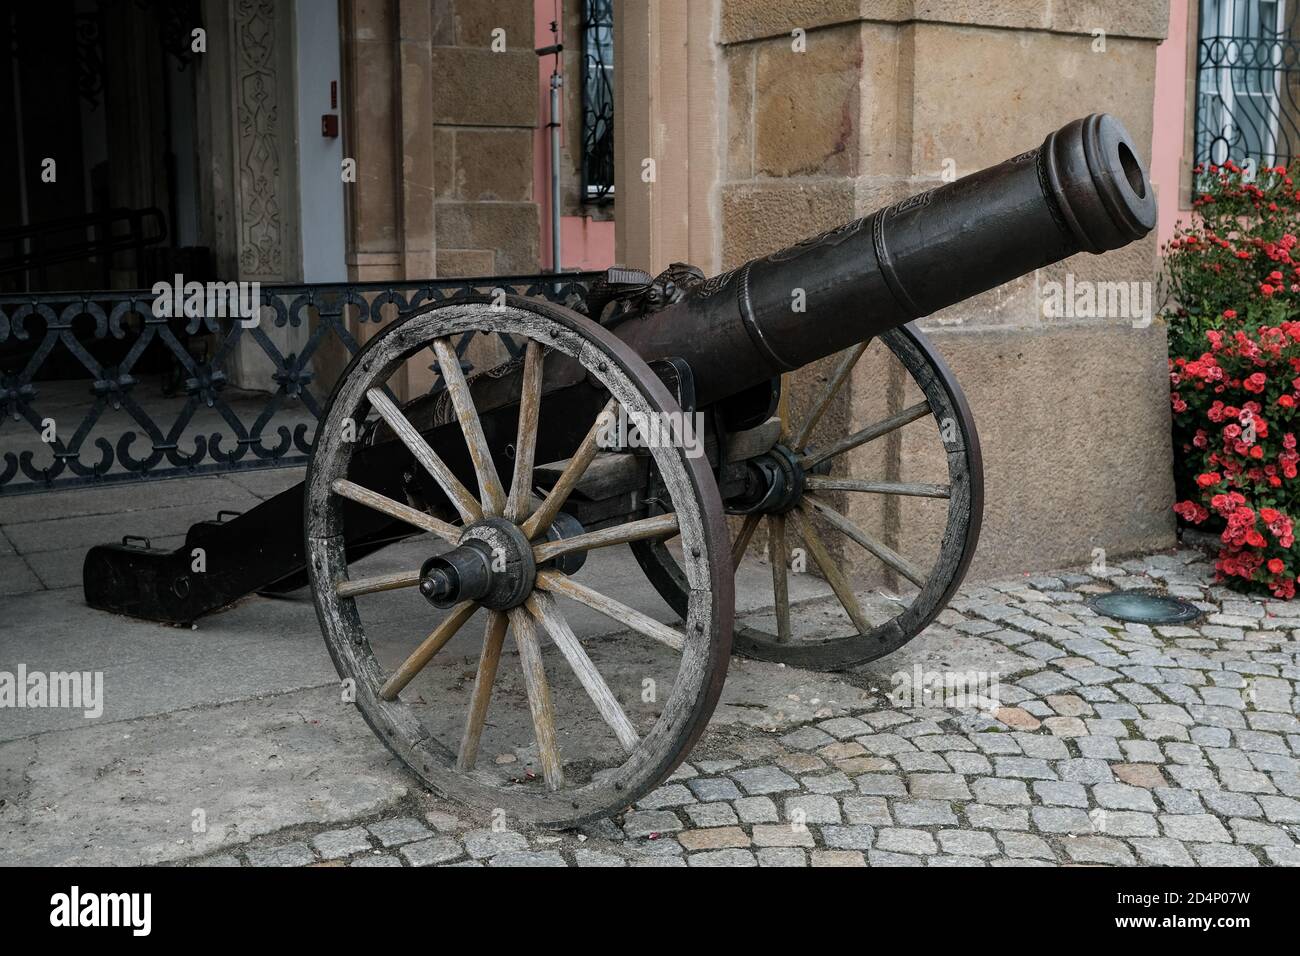 Walbrzych, Poland - 18 July 2020: The cannons at the main entrance, Ksiaz Castle, the largest castle in the Silesia region. Castle Museum Stock Photo